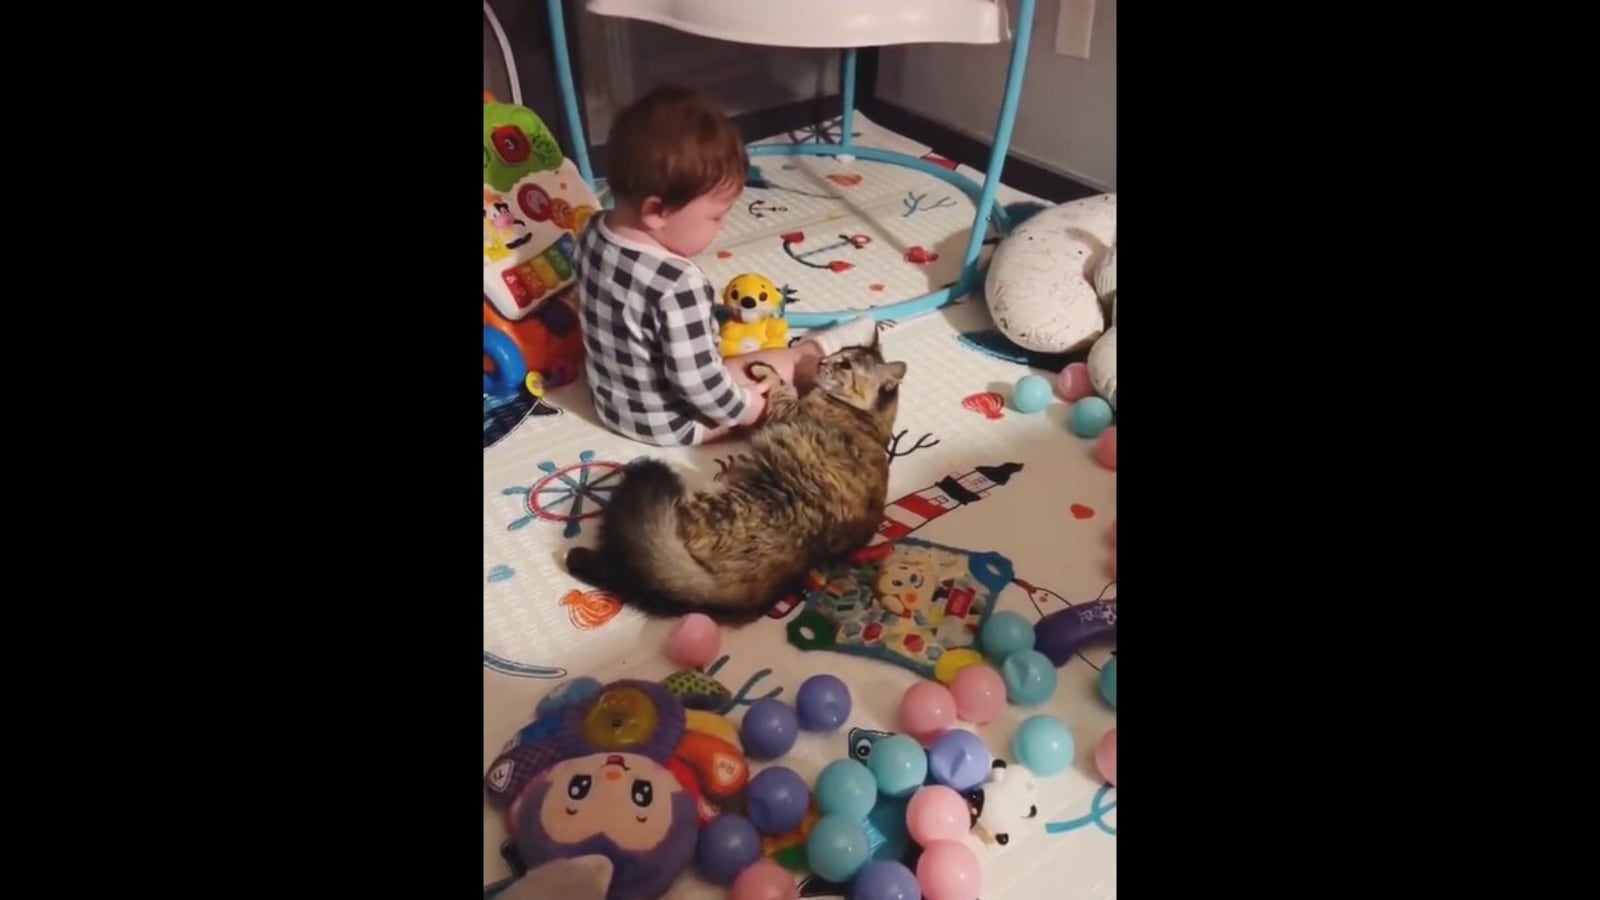 Cat tries soothing crying baby, succeeds. Watch wholesome video | Trending